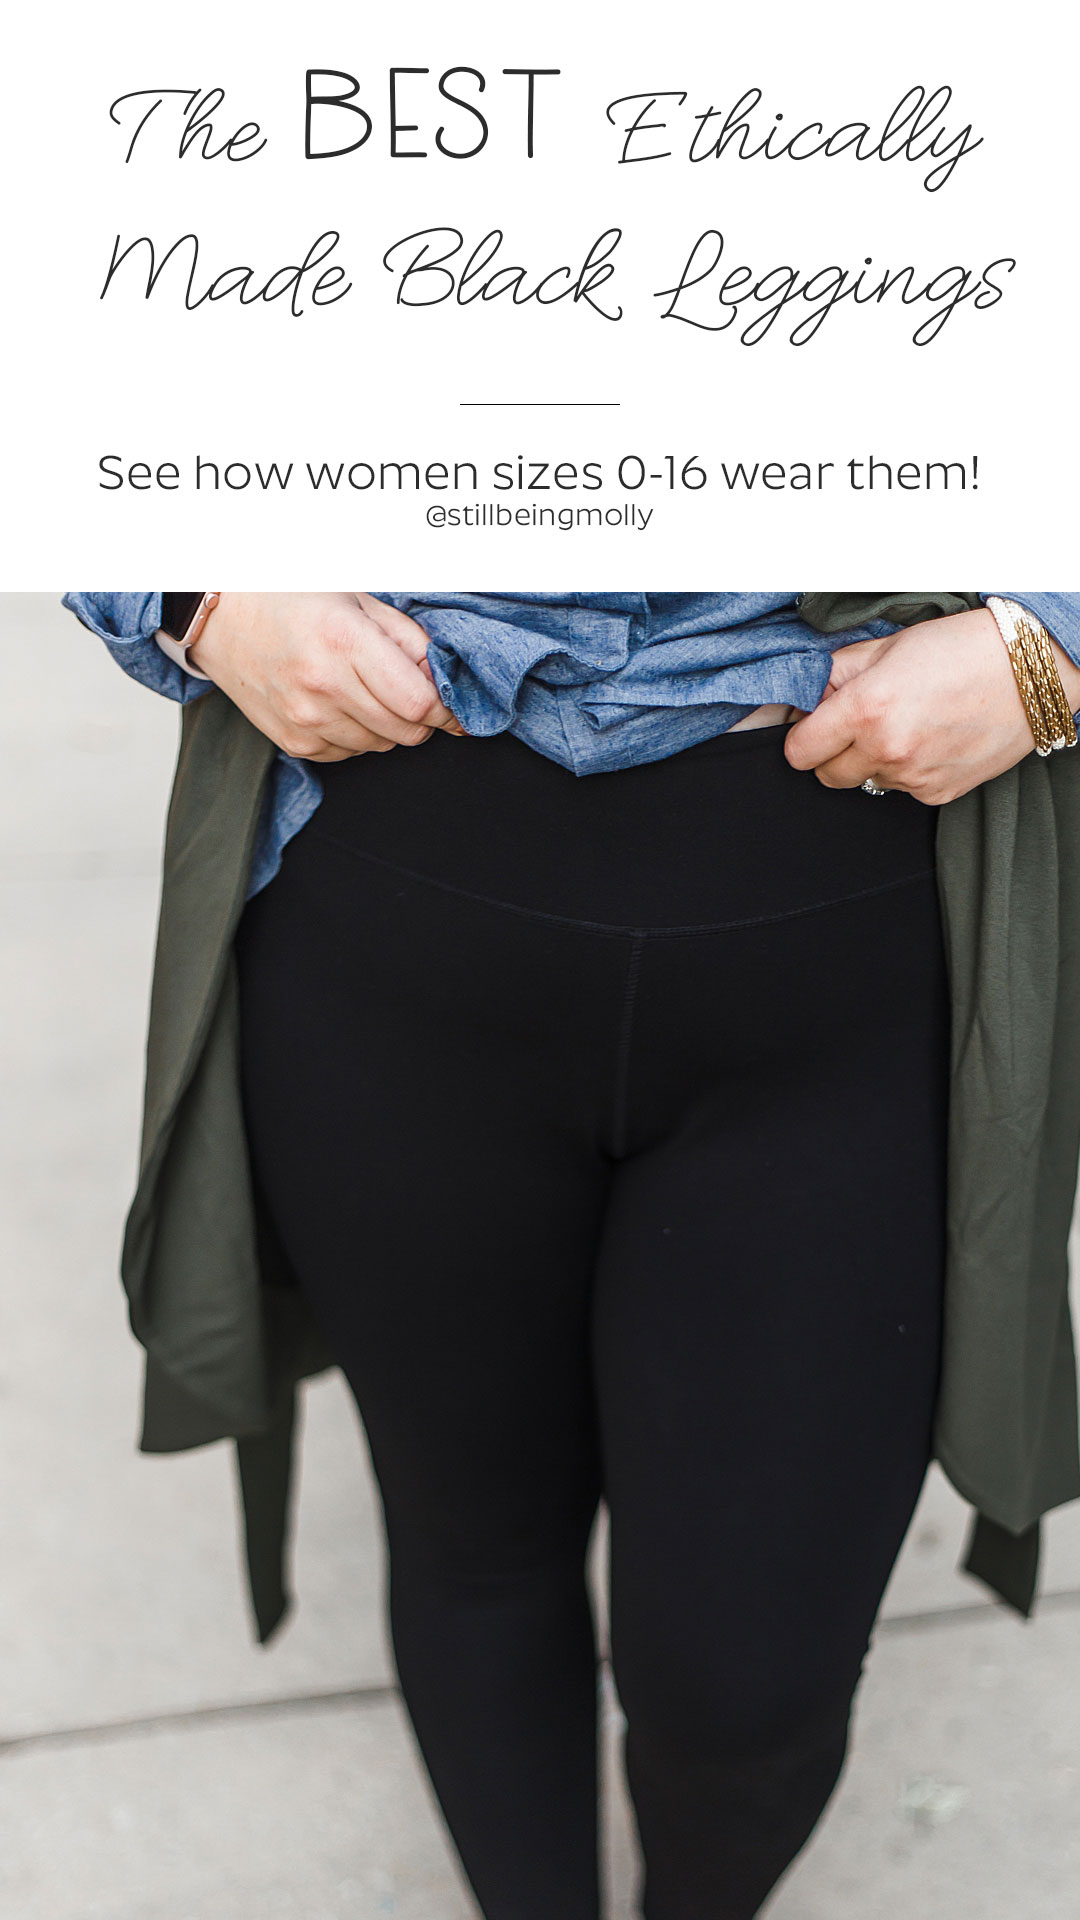 The BEST Ethically Made Black Leggings - See how women size 0-16 wear them! | Fair Trade Black Leggings from Sseko Designs